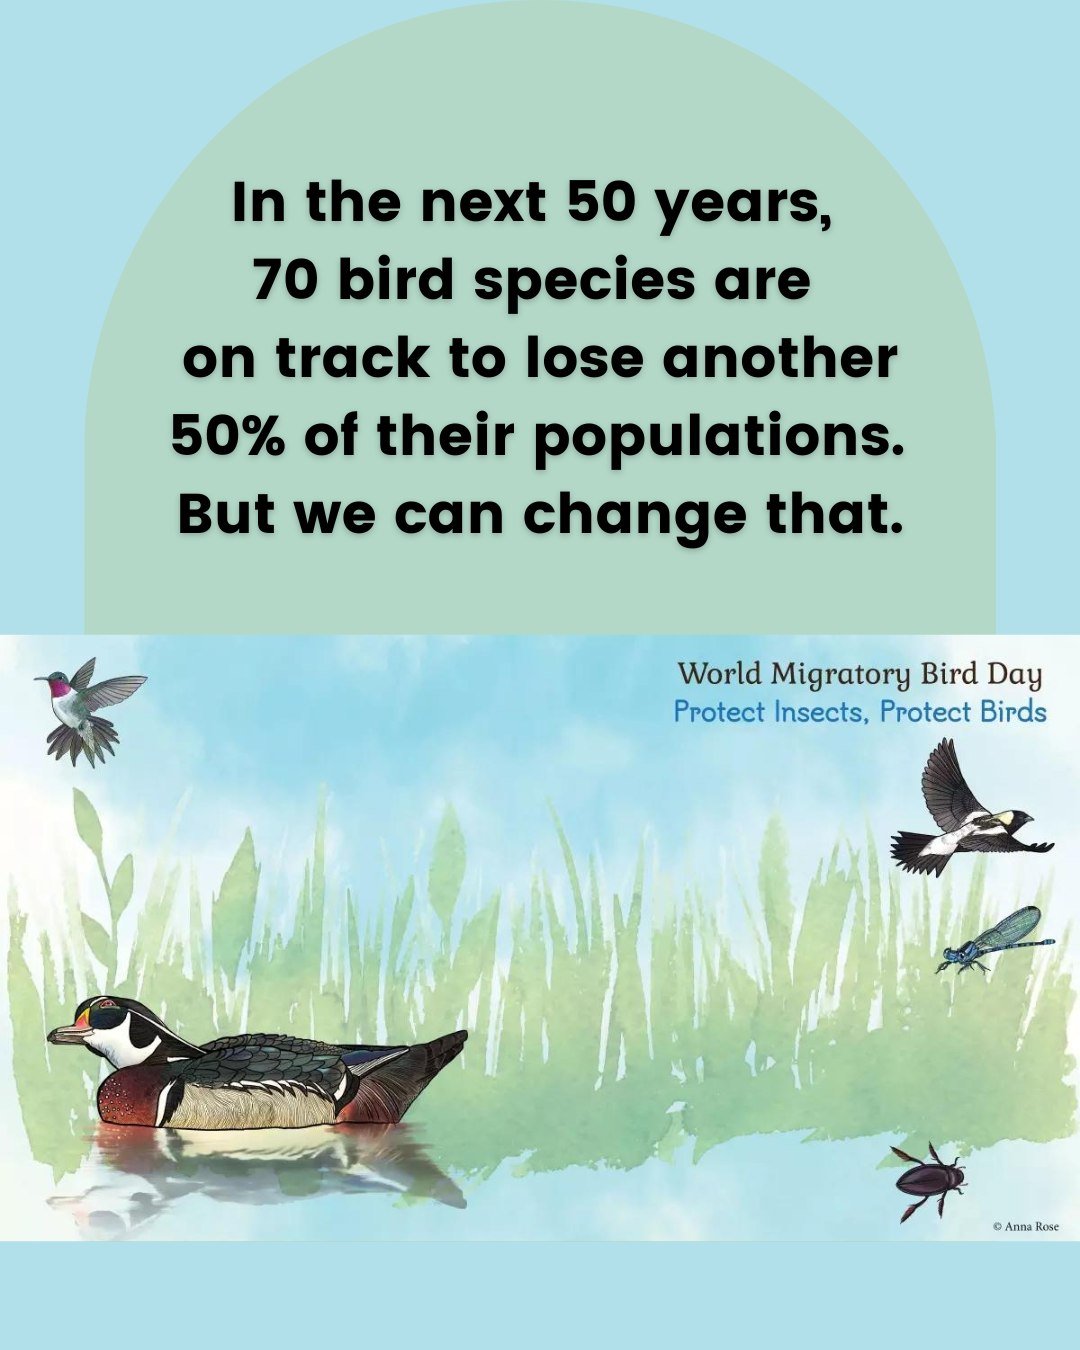 🐦On this World Migratory Bird Day, we recognize the interconnectedness of climate change and declining bird populations.
.
.
.
#ClimateChange #WorldMigratoryBirdDay #SaveTheBirds #ClimateCrisis